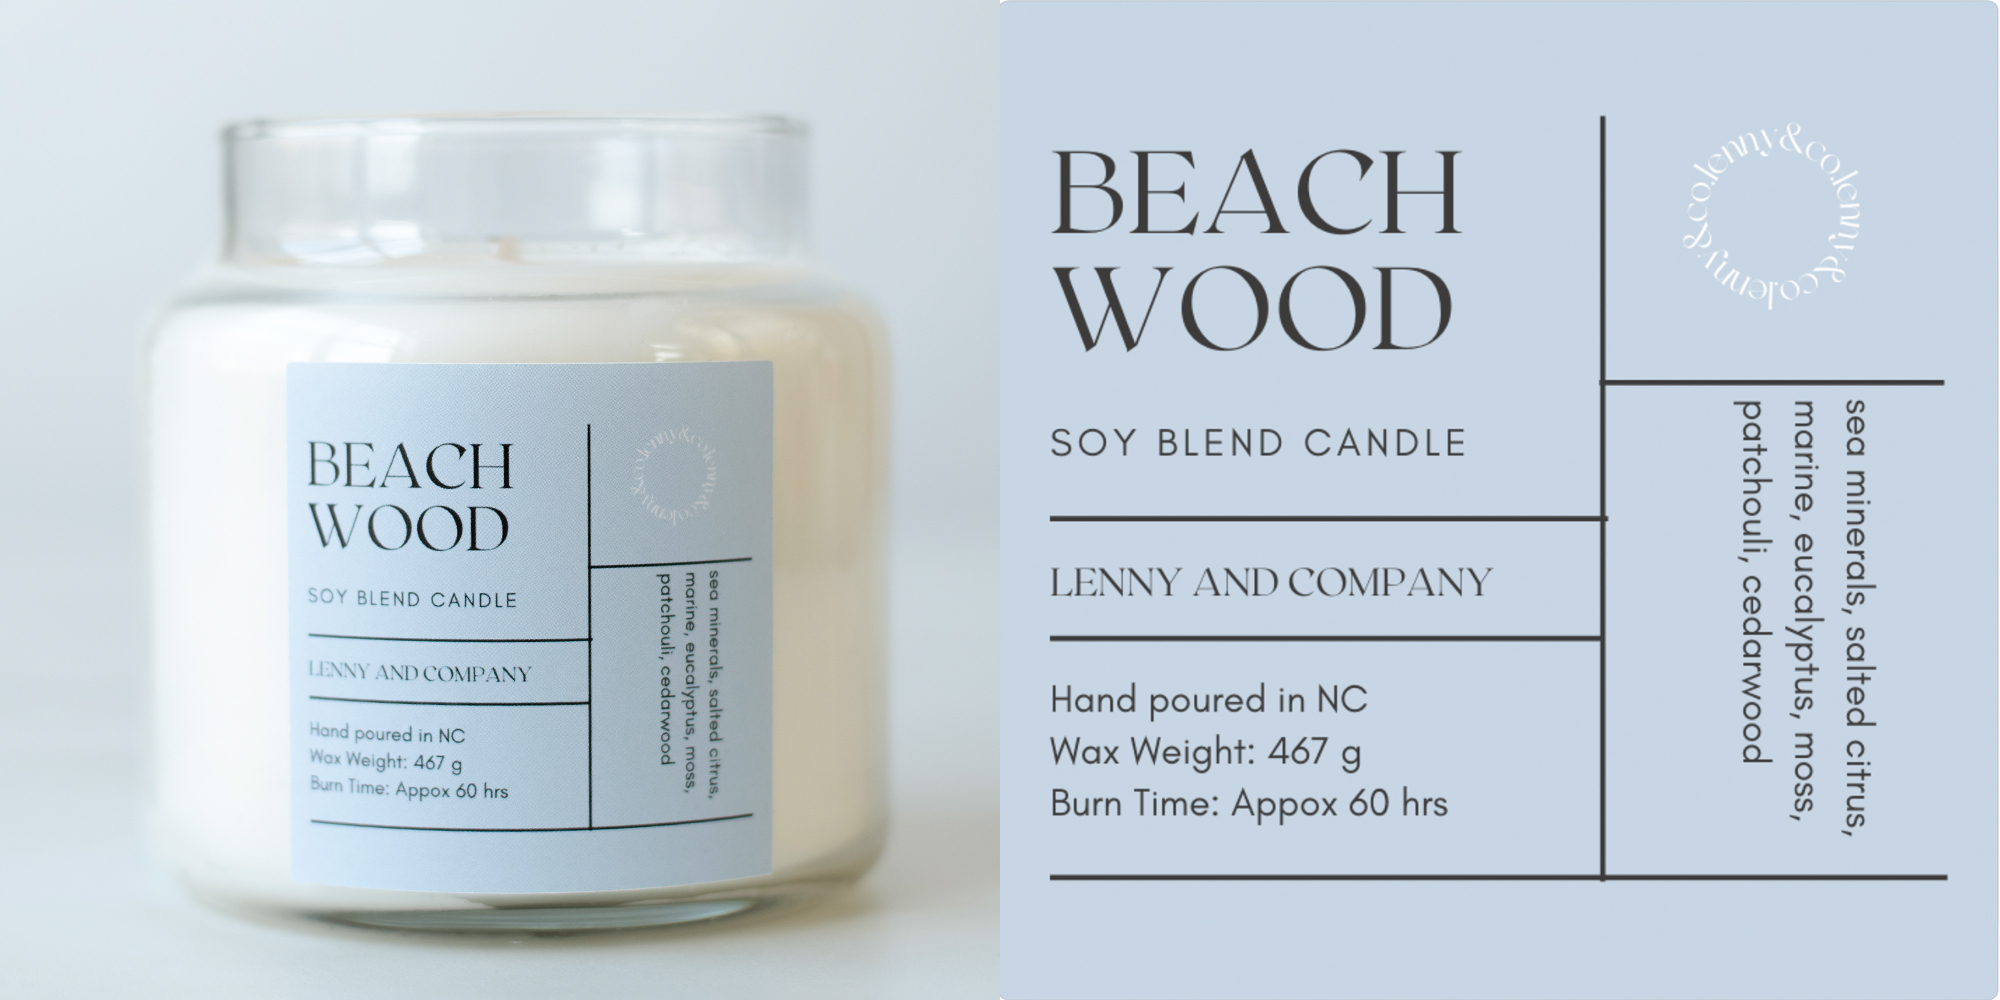 Beachwood fragrance oil candle and label.